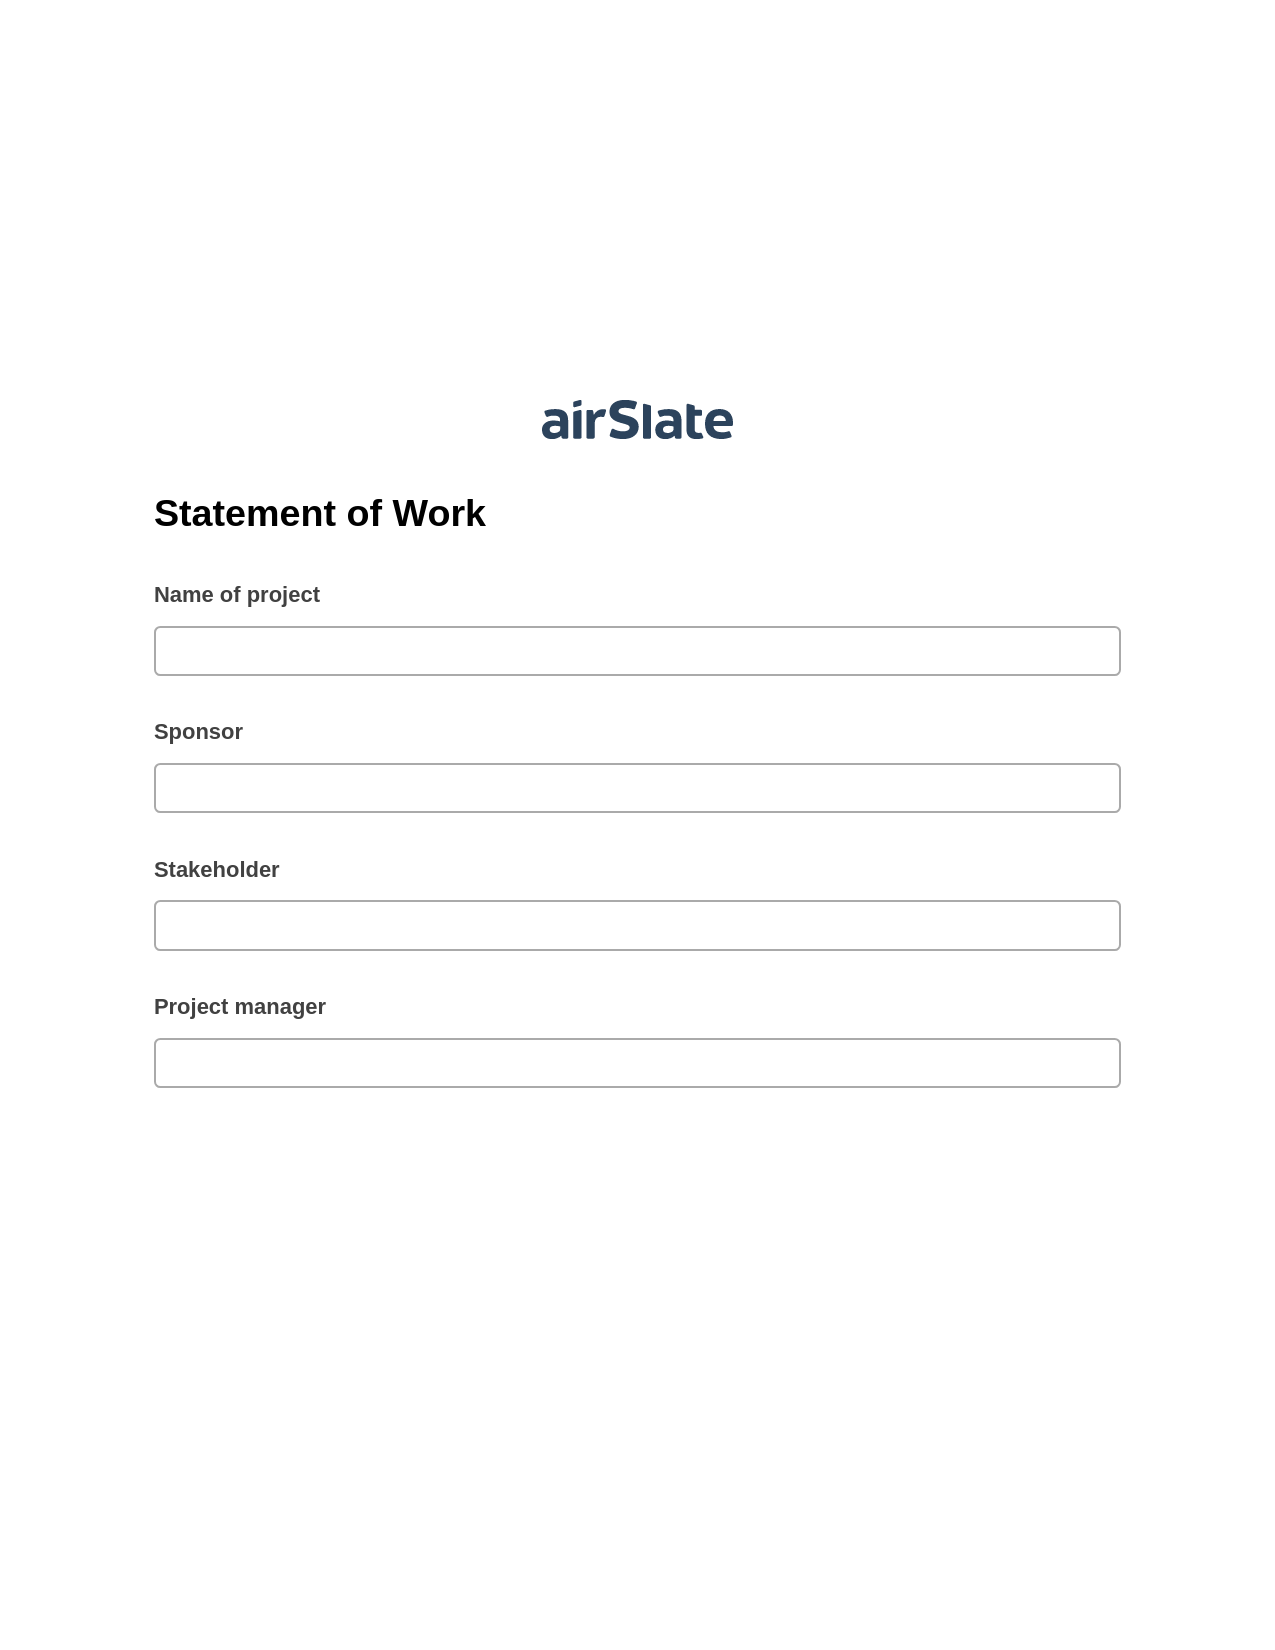 Statement of Work Pre-fill from Excel Spreadsheet Bot, Send a Slate with Roles Bot, Post-finish Document Bot